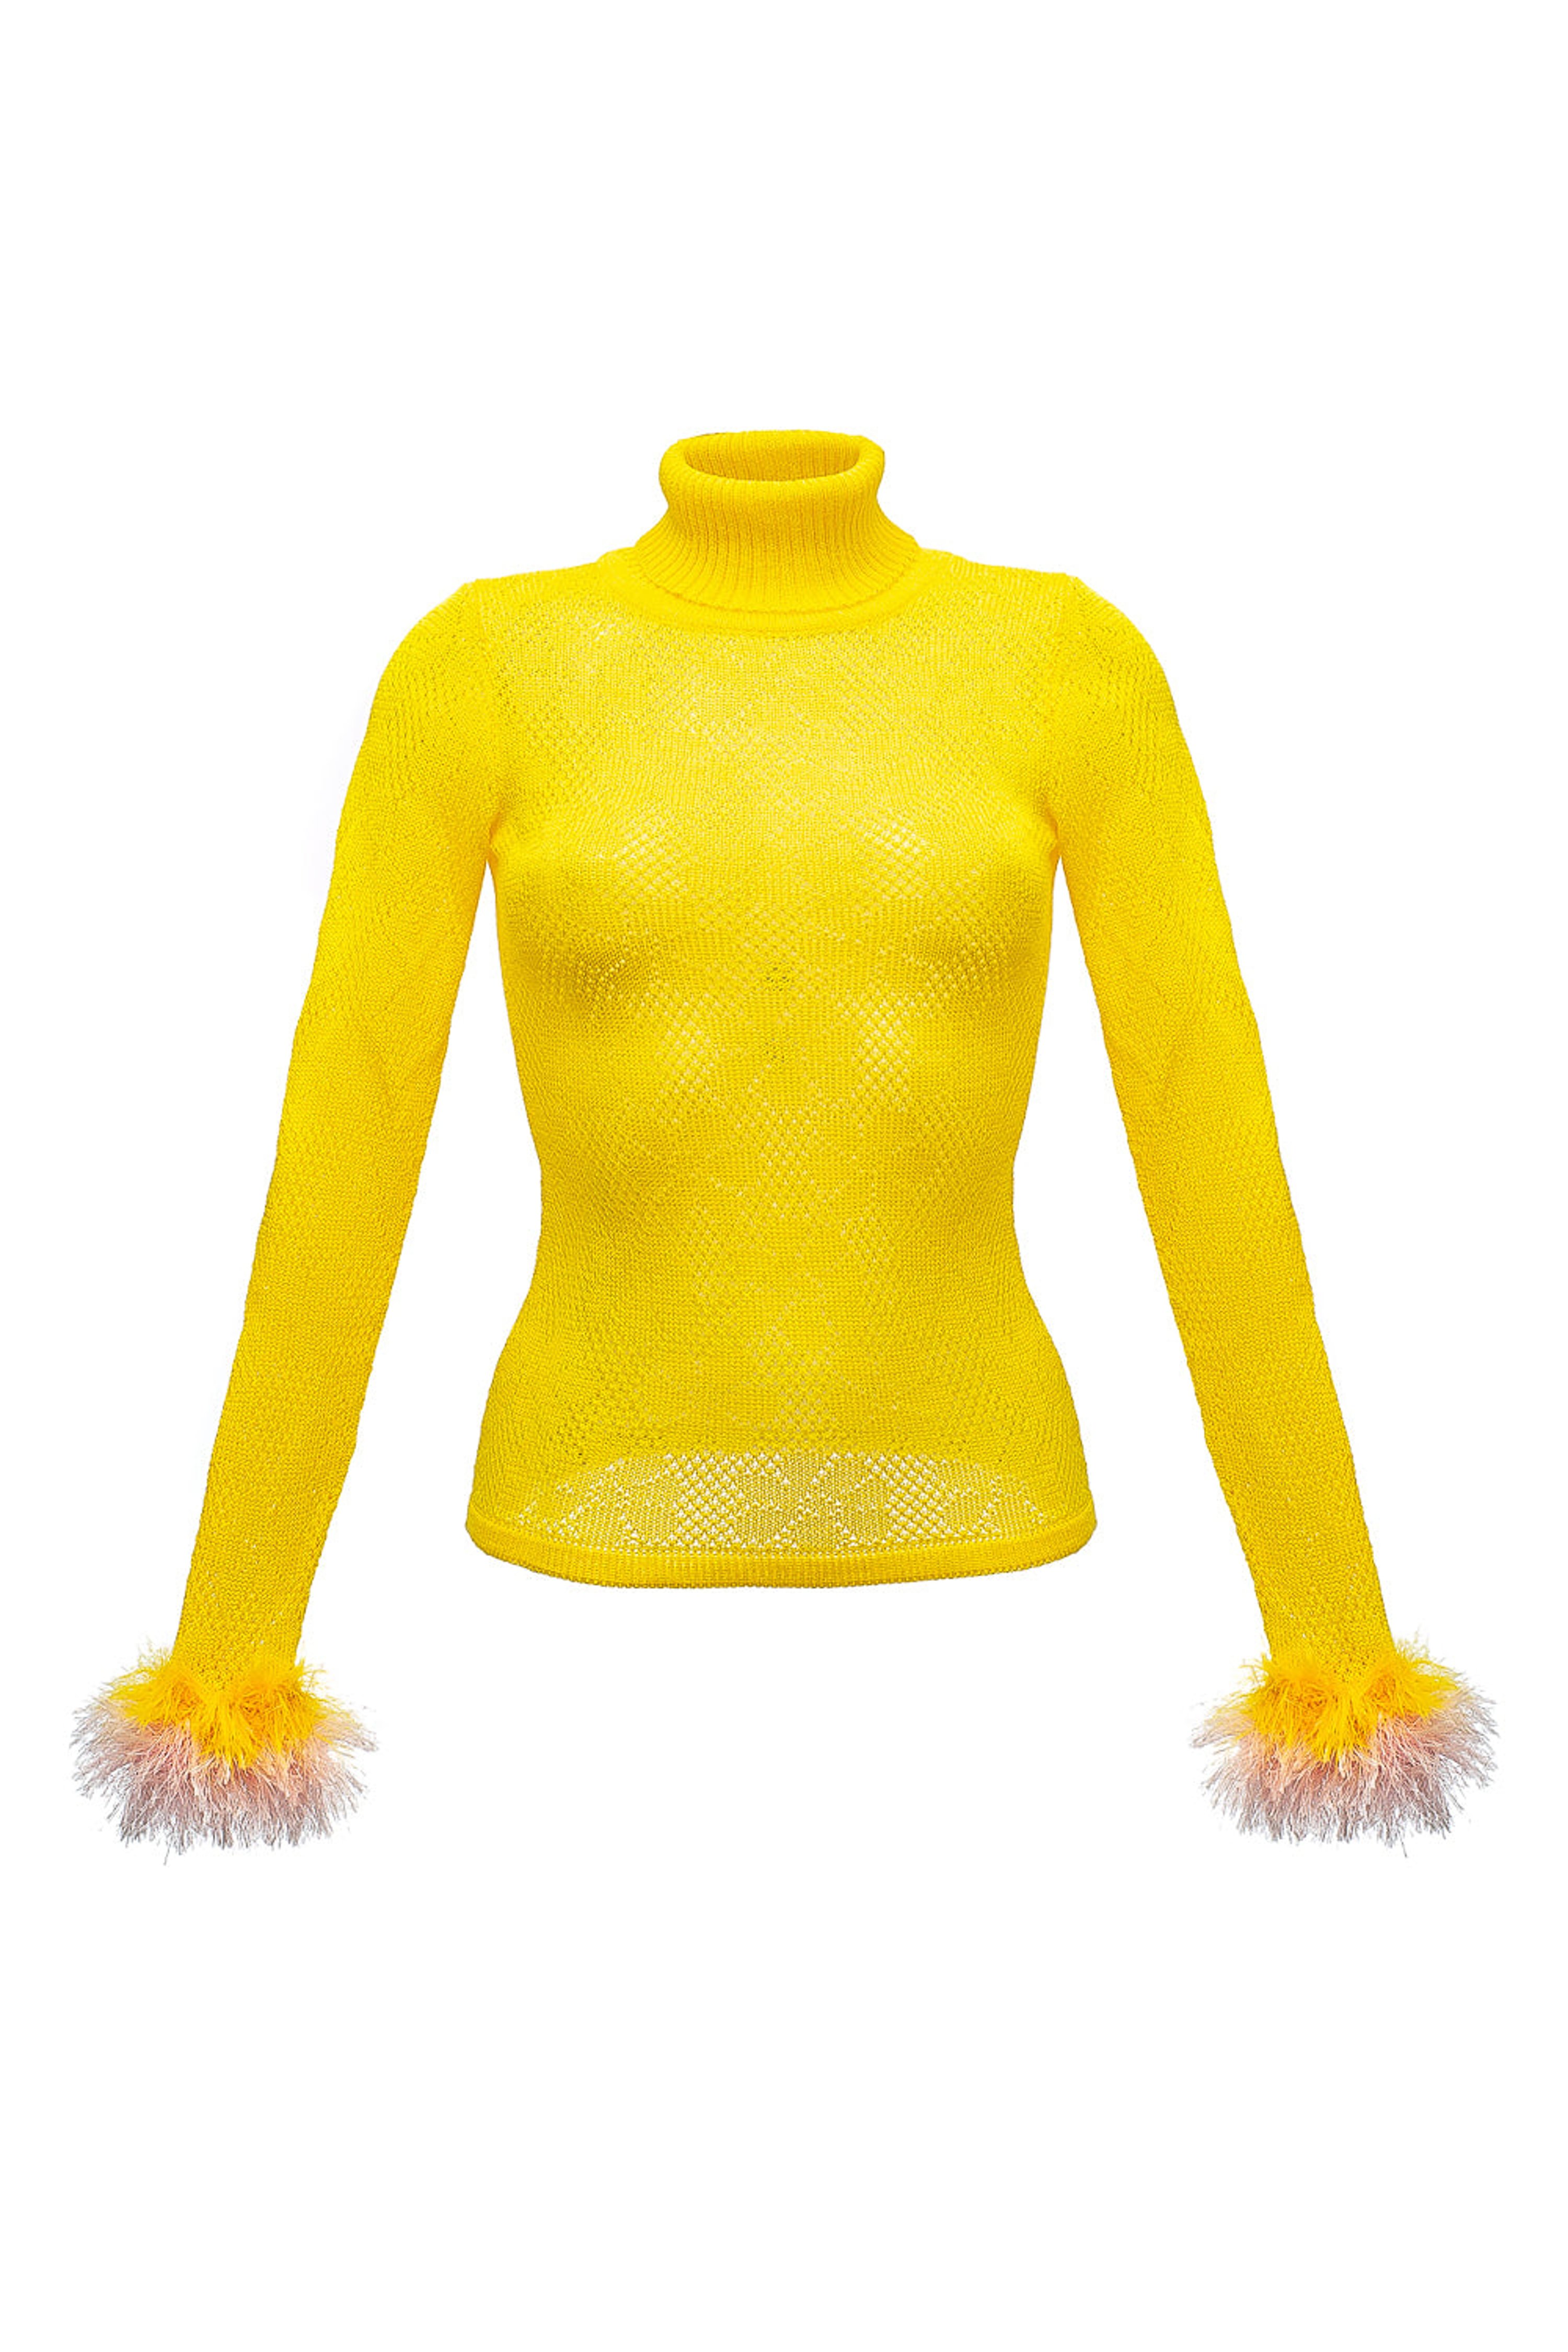 ANDREEVA ANDREEVA LIME KNIT TURTLENECK WITH HANDMADE KNIT DETAILS